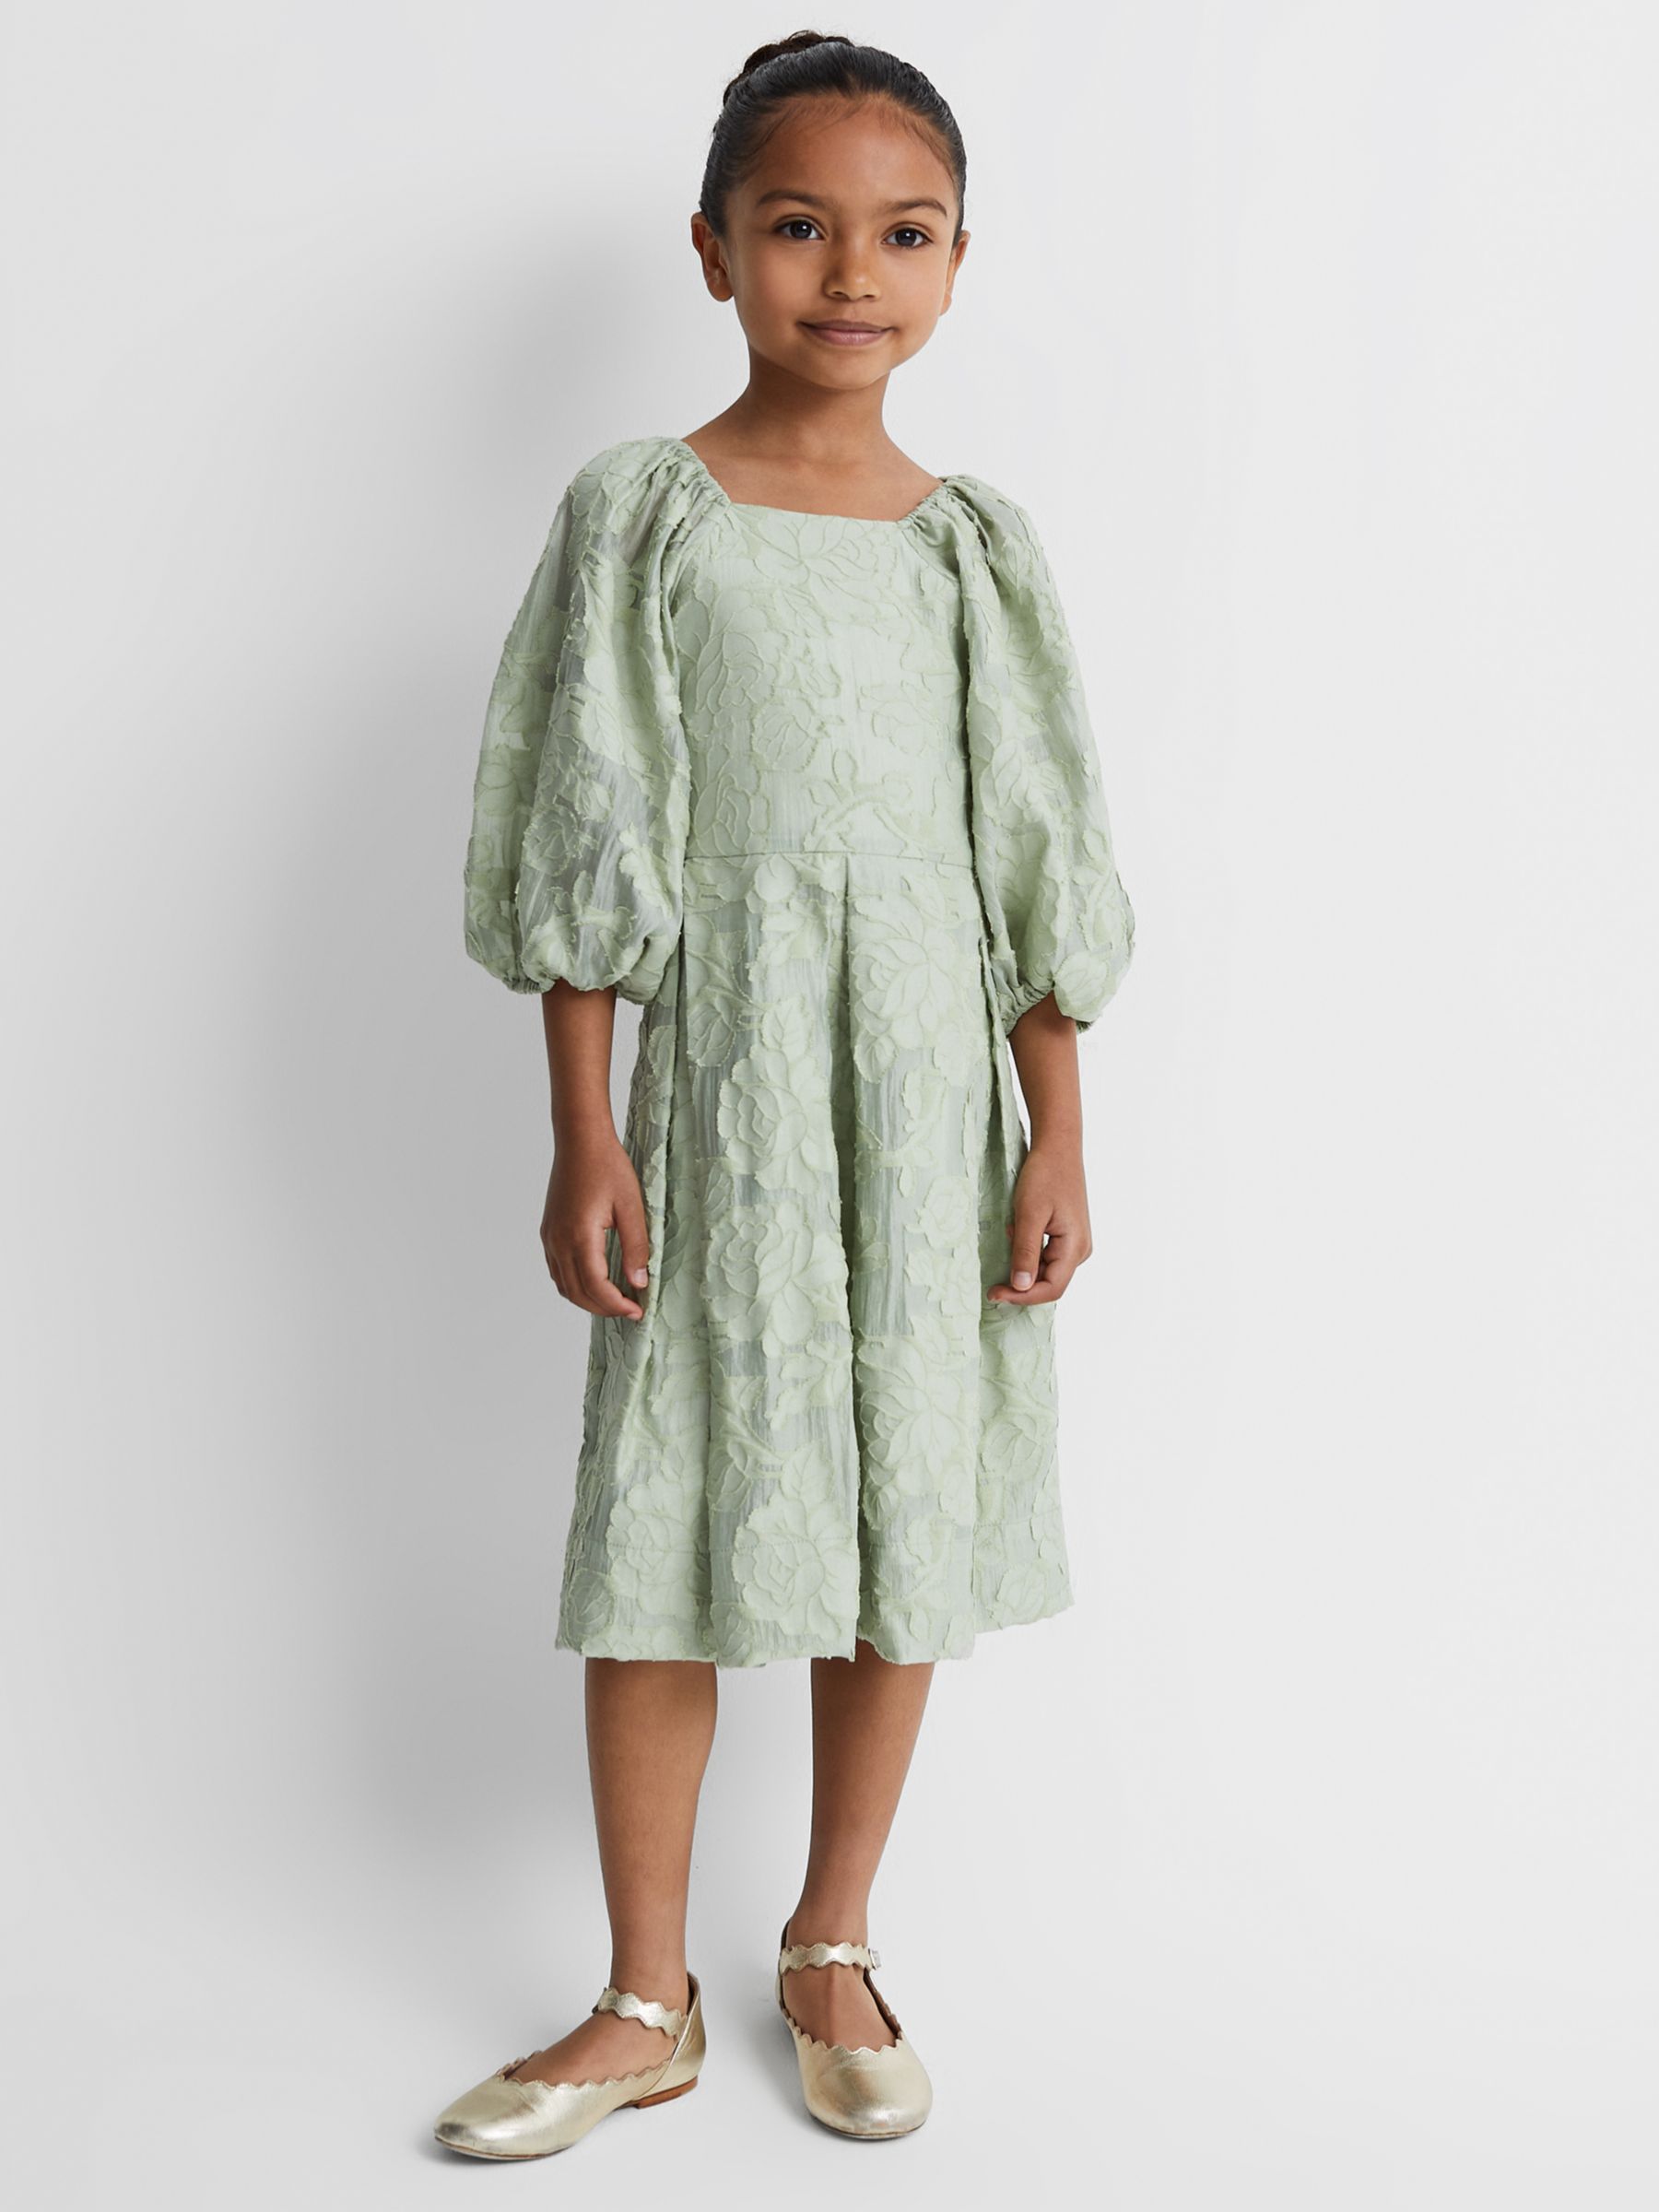 Reiss Kids' Thea Floral Jacquard Puff Sleeve Dress, Sage, 8-9 years